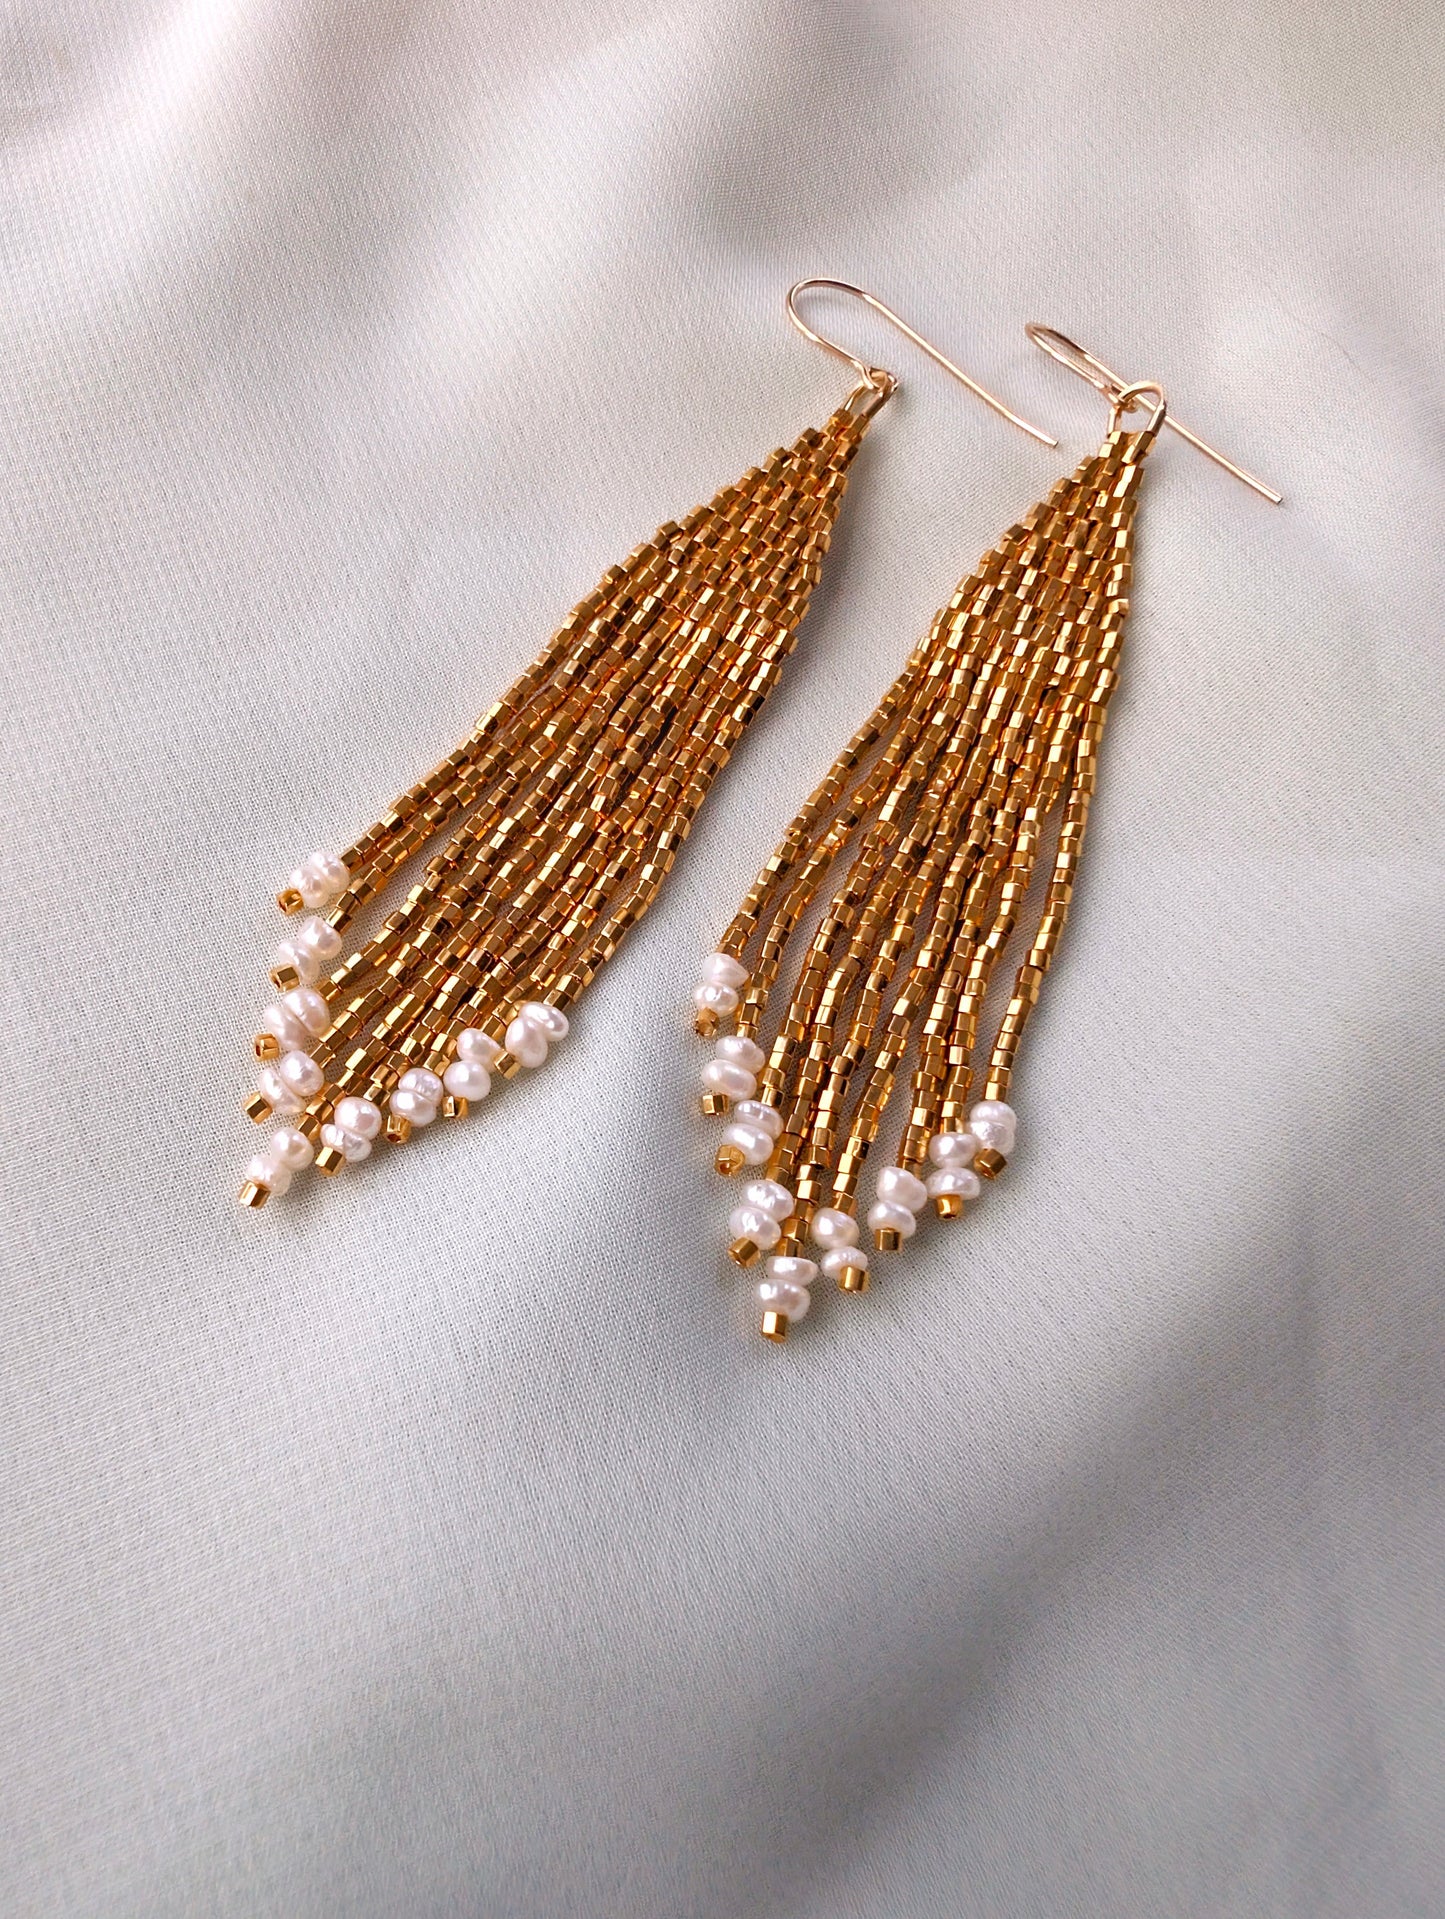 RESERVED Liquid Gold - Freshwater Pearls, 14k Gold Fill Hook & 24k Gold Plated Hex-cut Beads